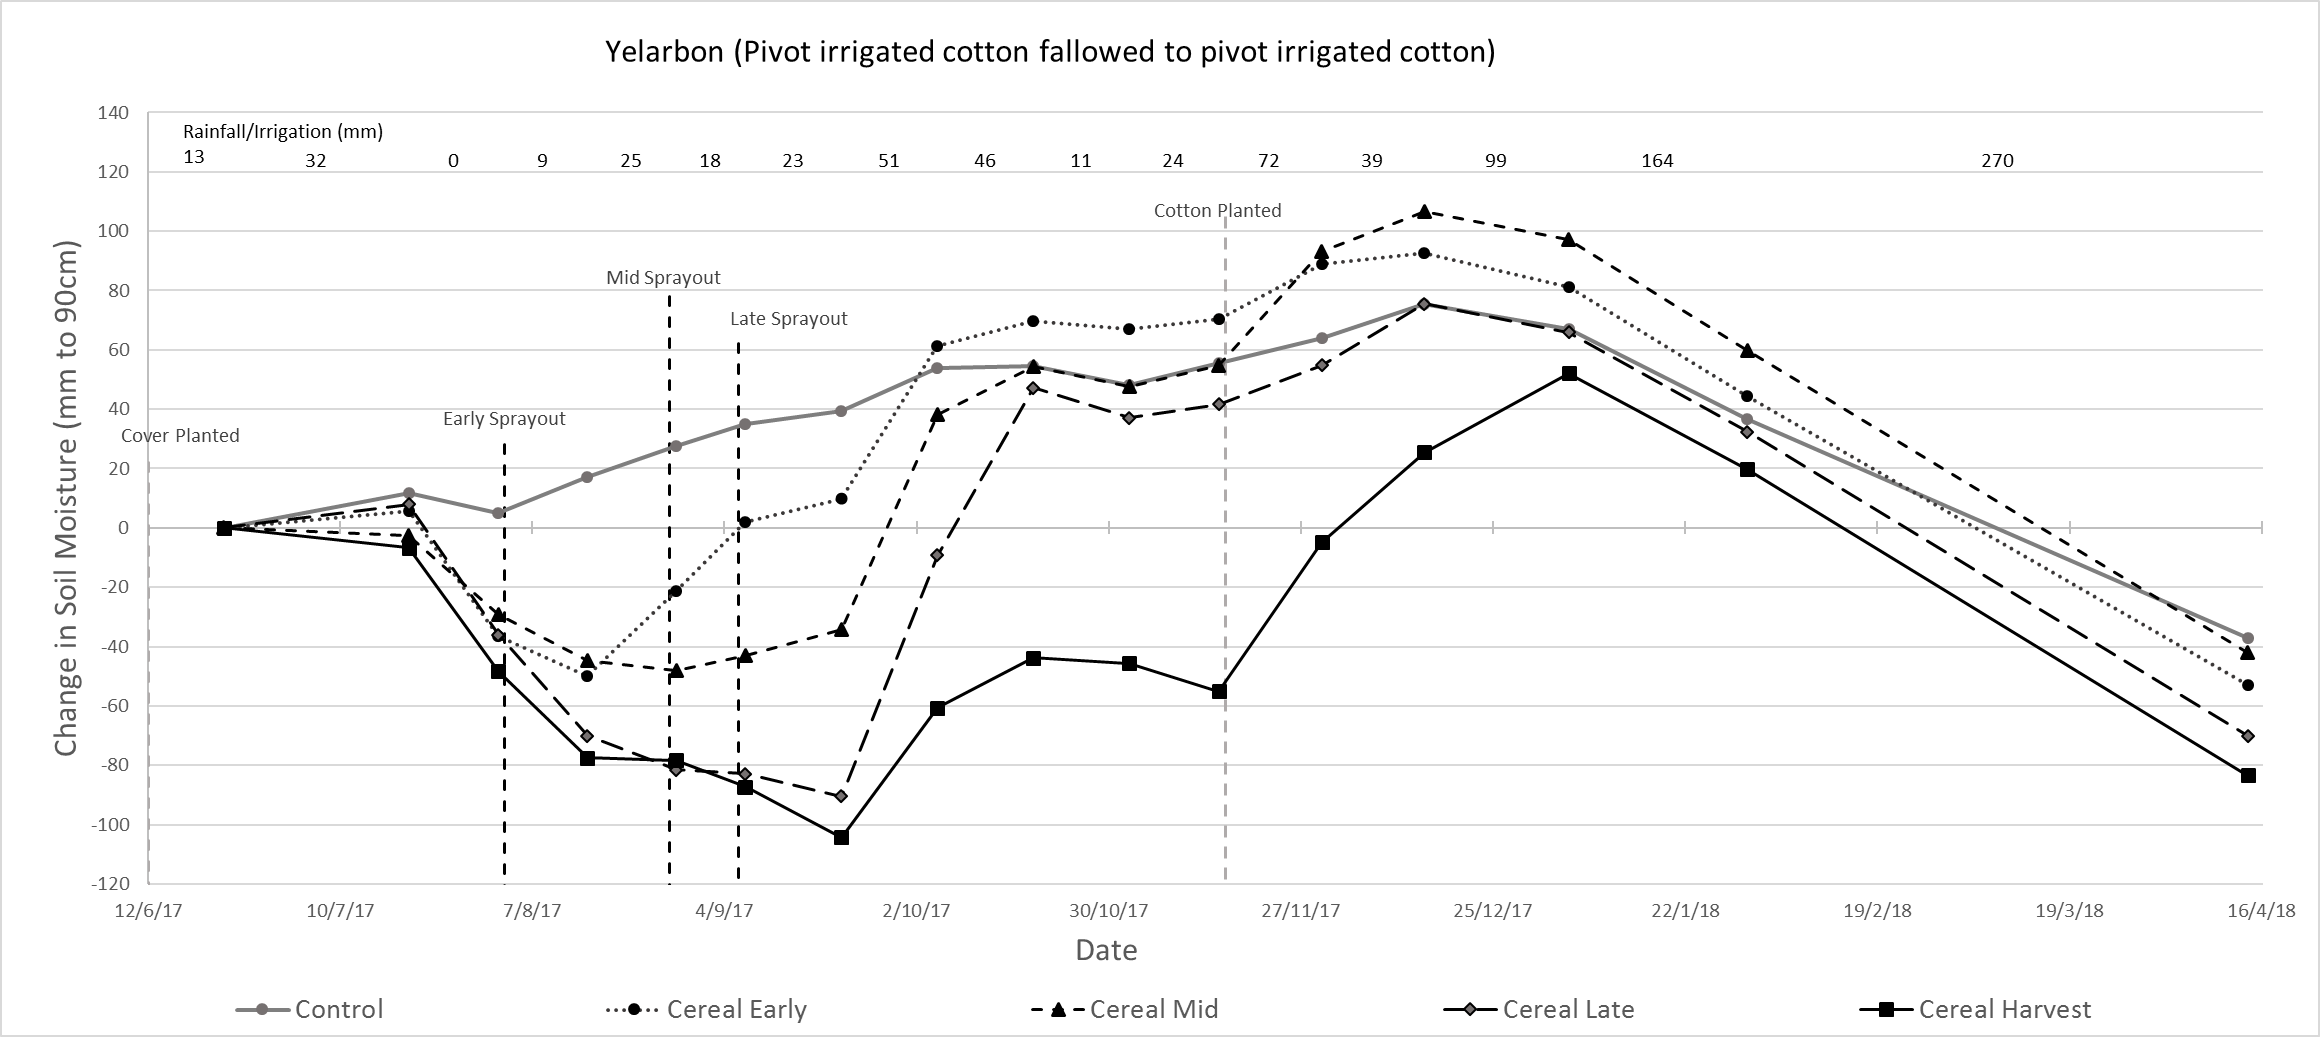 This is a line graph showing the changes in soil water (mm to 90 cm) from planting of key cover crop treatments until defoliation of the subsequent cotton crop at Yelarbon.